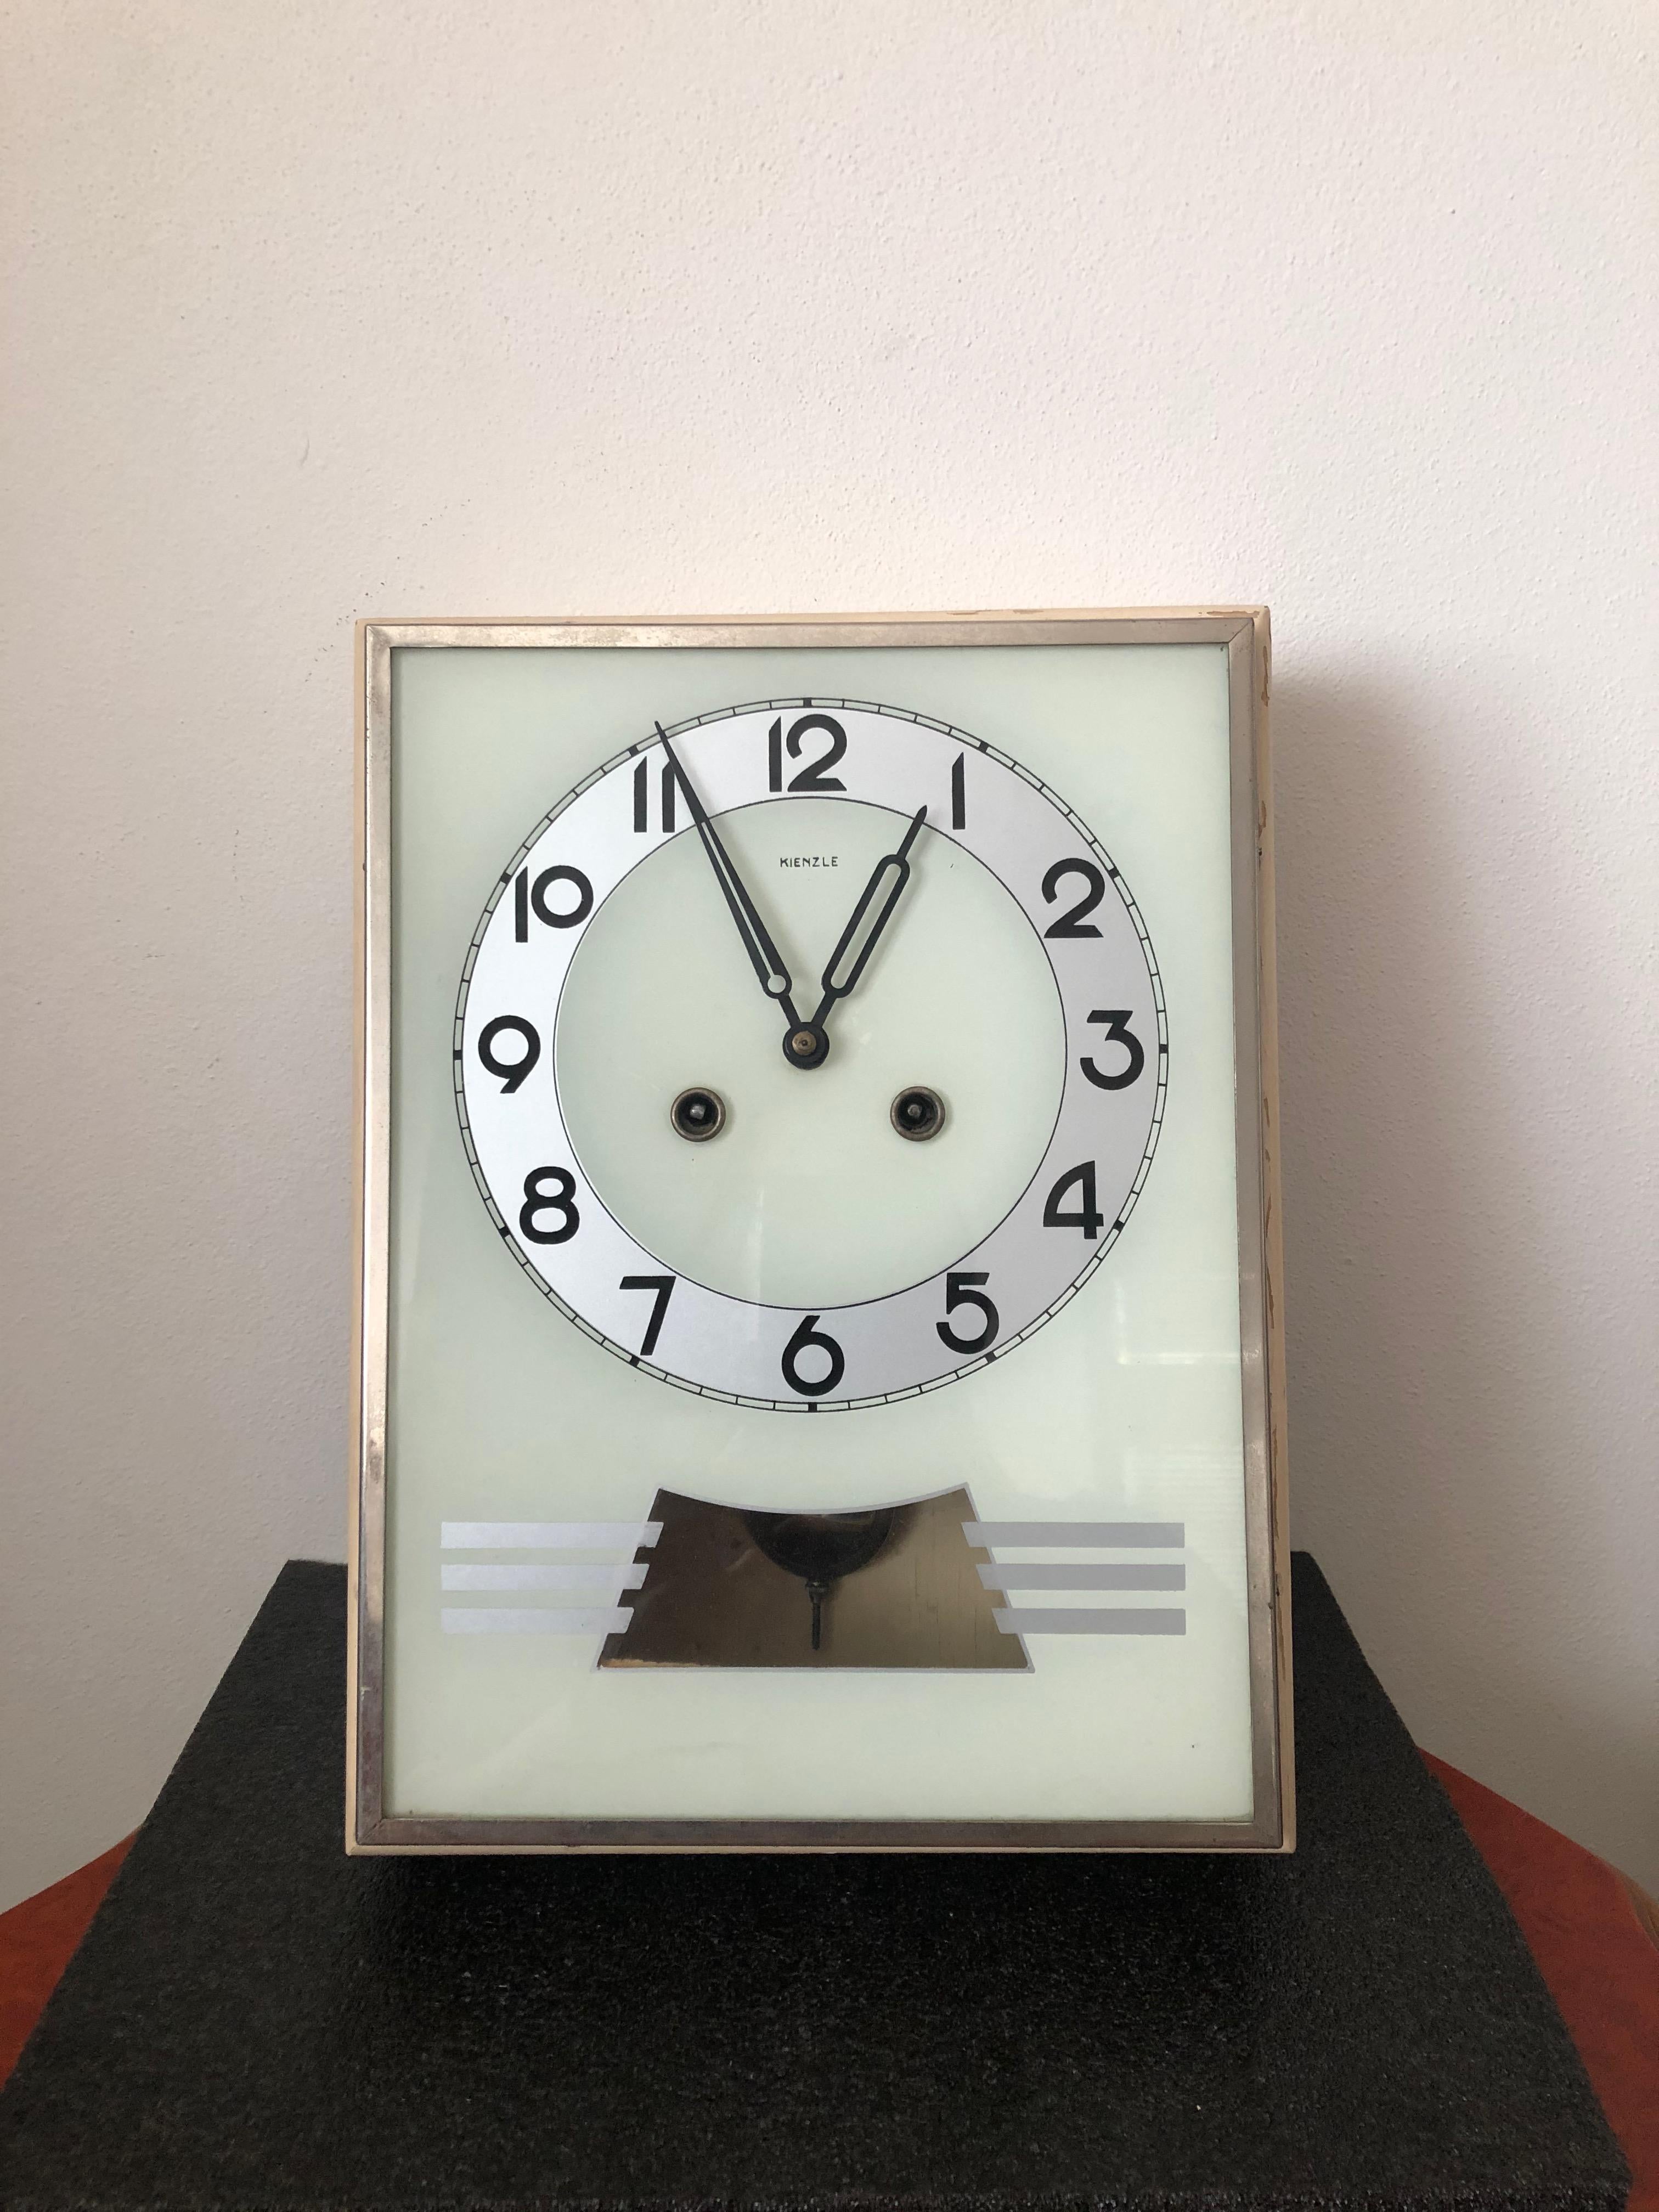 - Clock are in good condition - somewhere missing color - see the picture
- Chimes also in good condition, working well
- Striken every 30 min.
- The clock are including Key and pendulum.